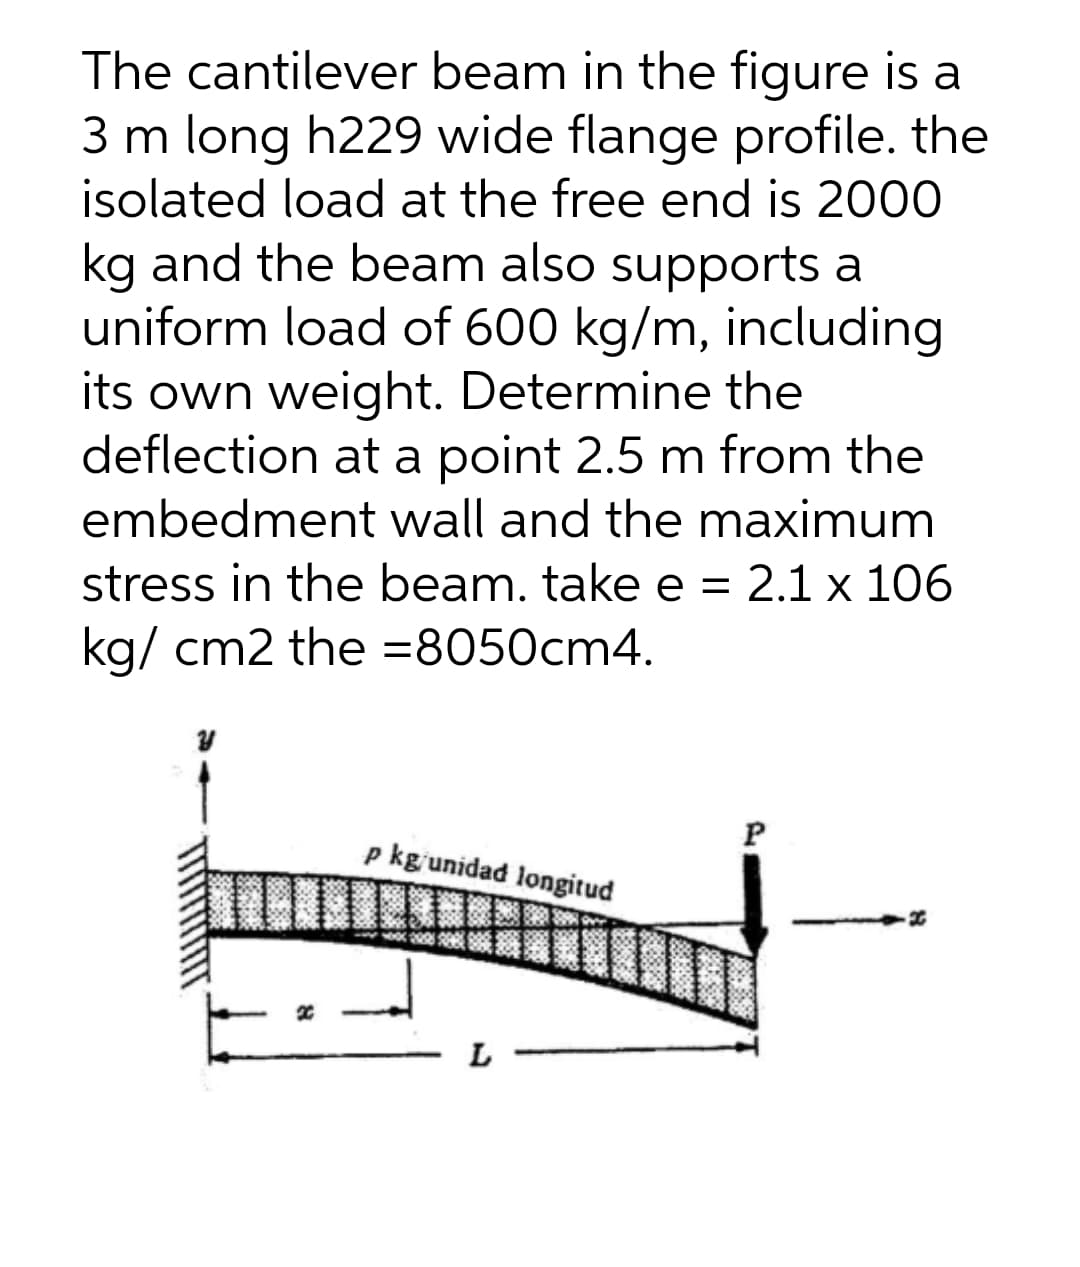 The cantilever beam in the figure is a
3 m long h229 wide flange profile. the
isolated load at the free end is 2000
kg and the beam also supports a
uniform load of 600 kg/m, including
its own weight. Determine the
deflection at a point 2.5 m from the
embedment wall and the maximum
stress in the beam. take e = 2.1 x 106
kg/ cm2 the =8050cm4.
P
p kg'unidad longitud
L
